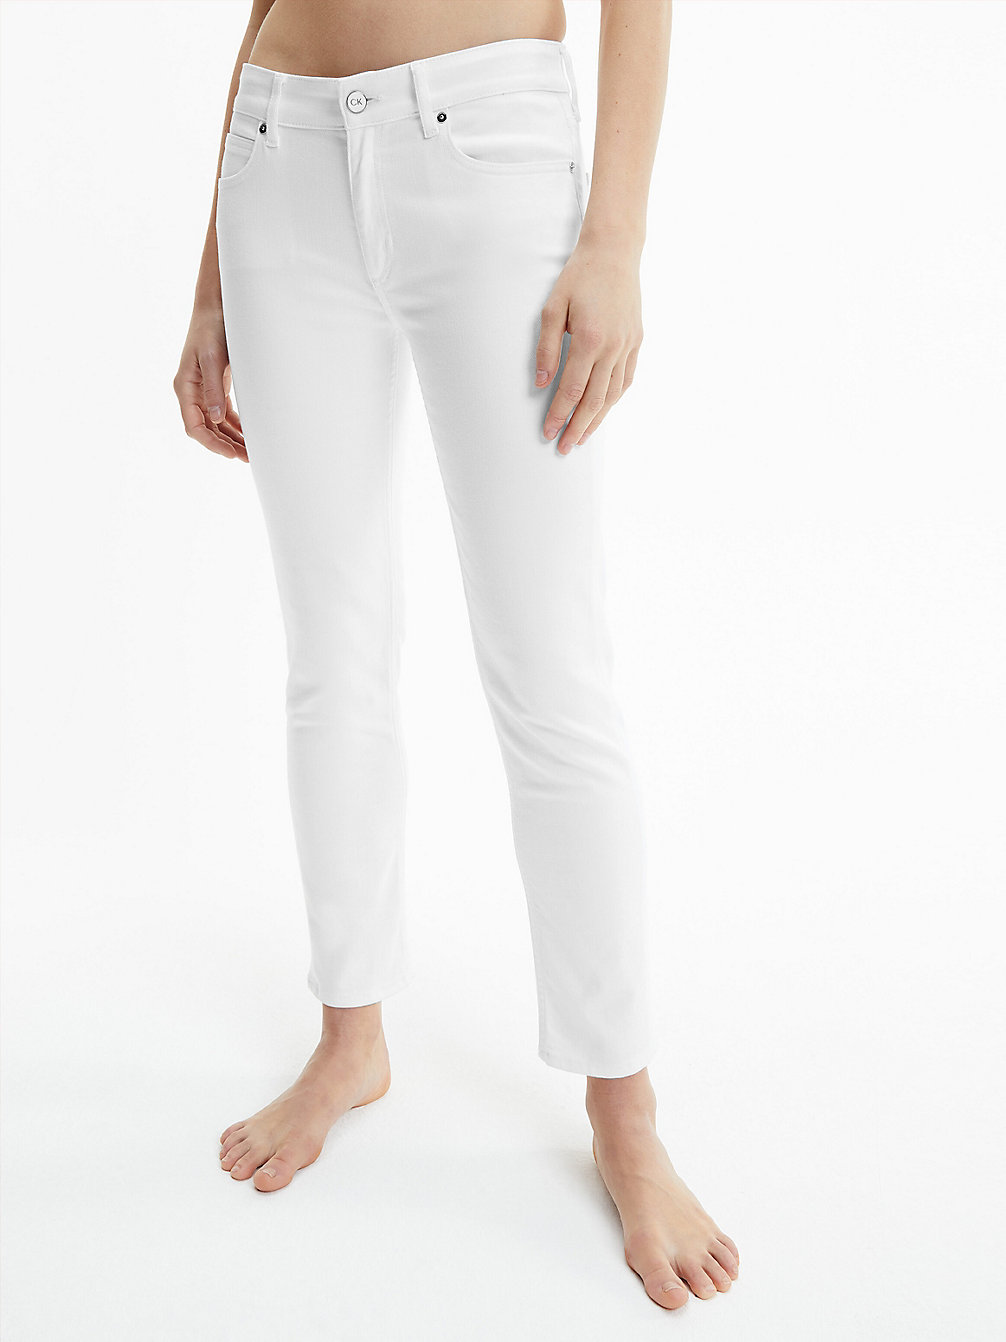 BRIGHT WHITE Mid Rise Slim Ankle Jeans undefined women Calvin Klein